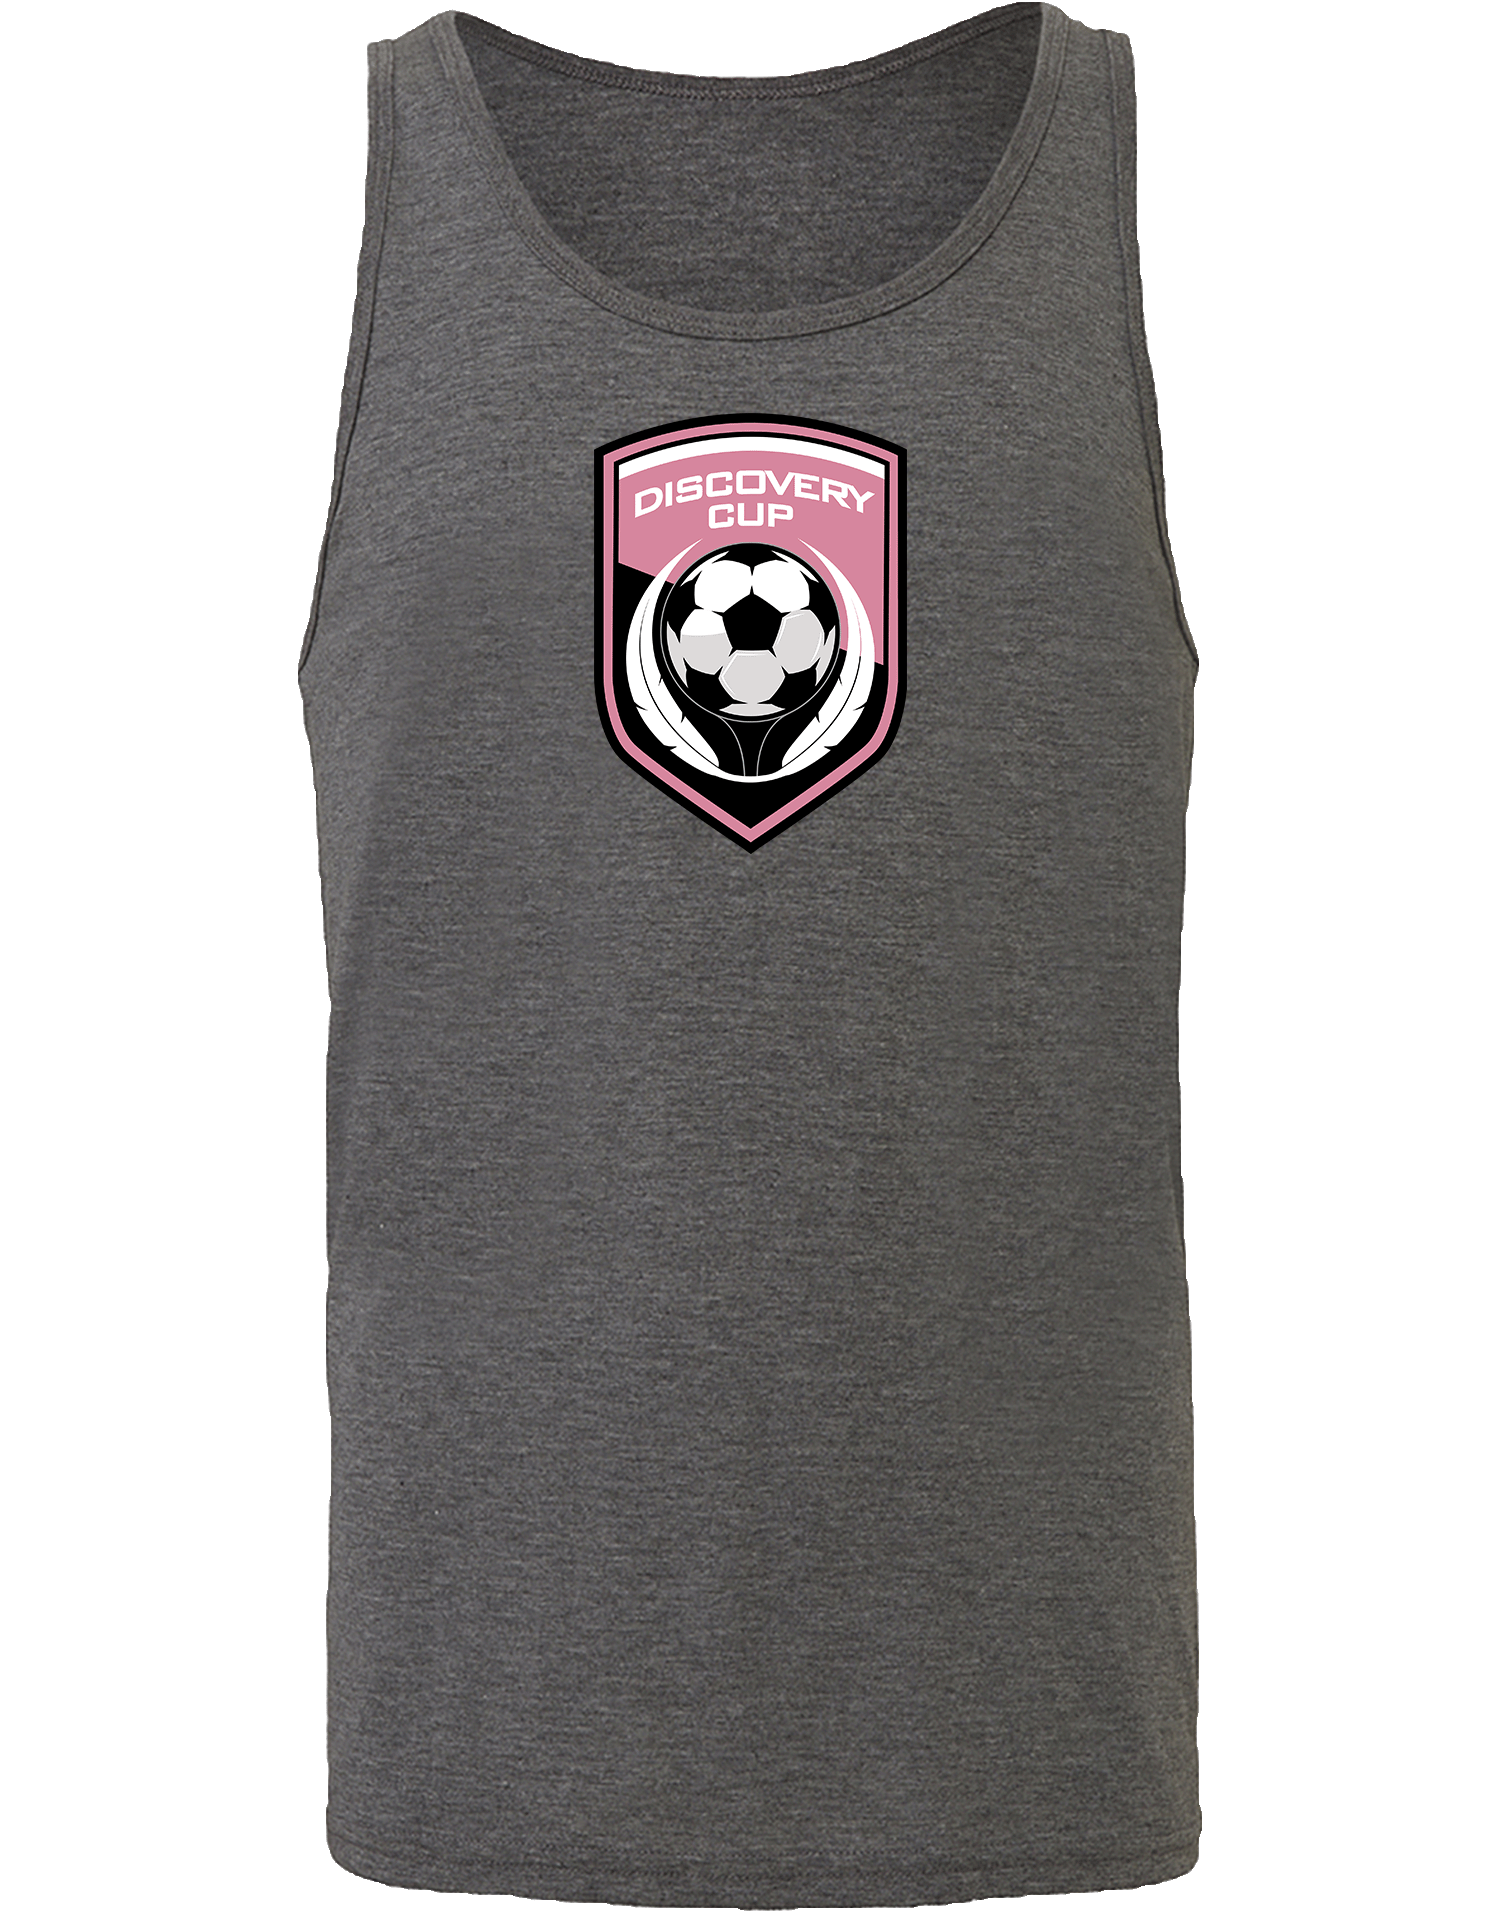 Tank Tops - 2023 Discovery Cup